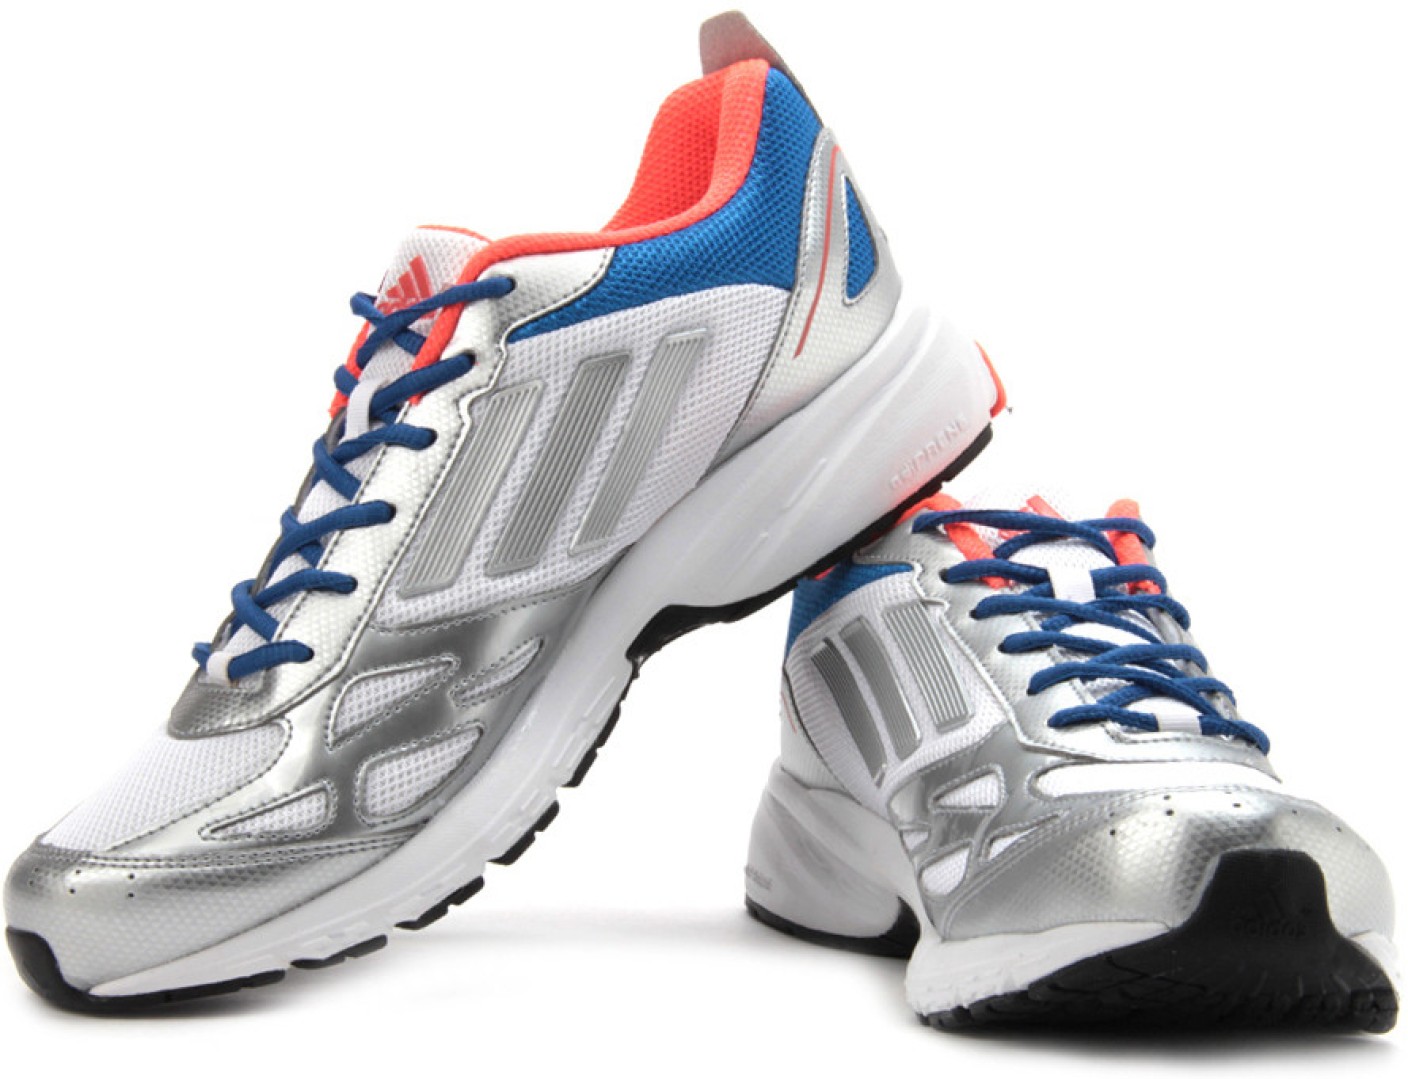 ADIDAS Zeta M Running Shoes For Men - Buy White, Silver Color ADIDAS ...